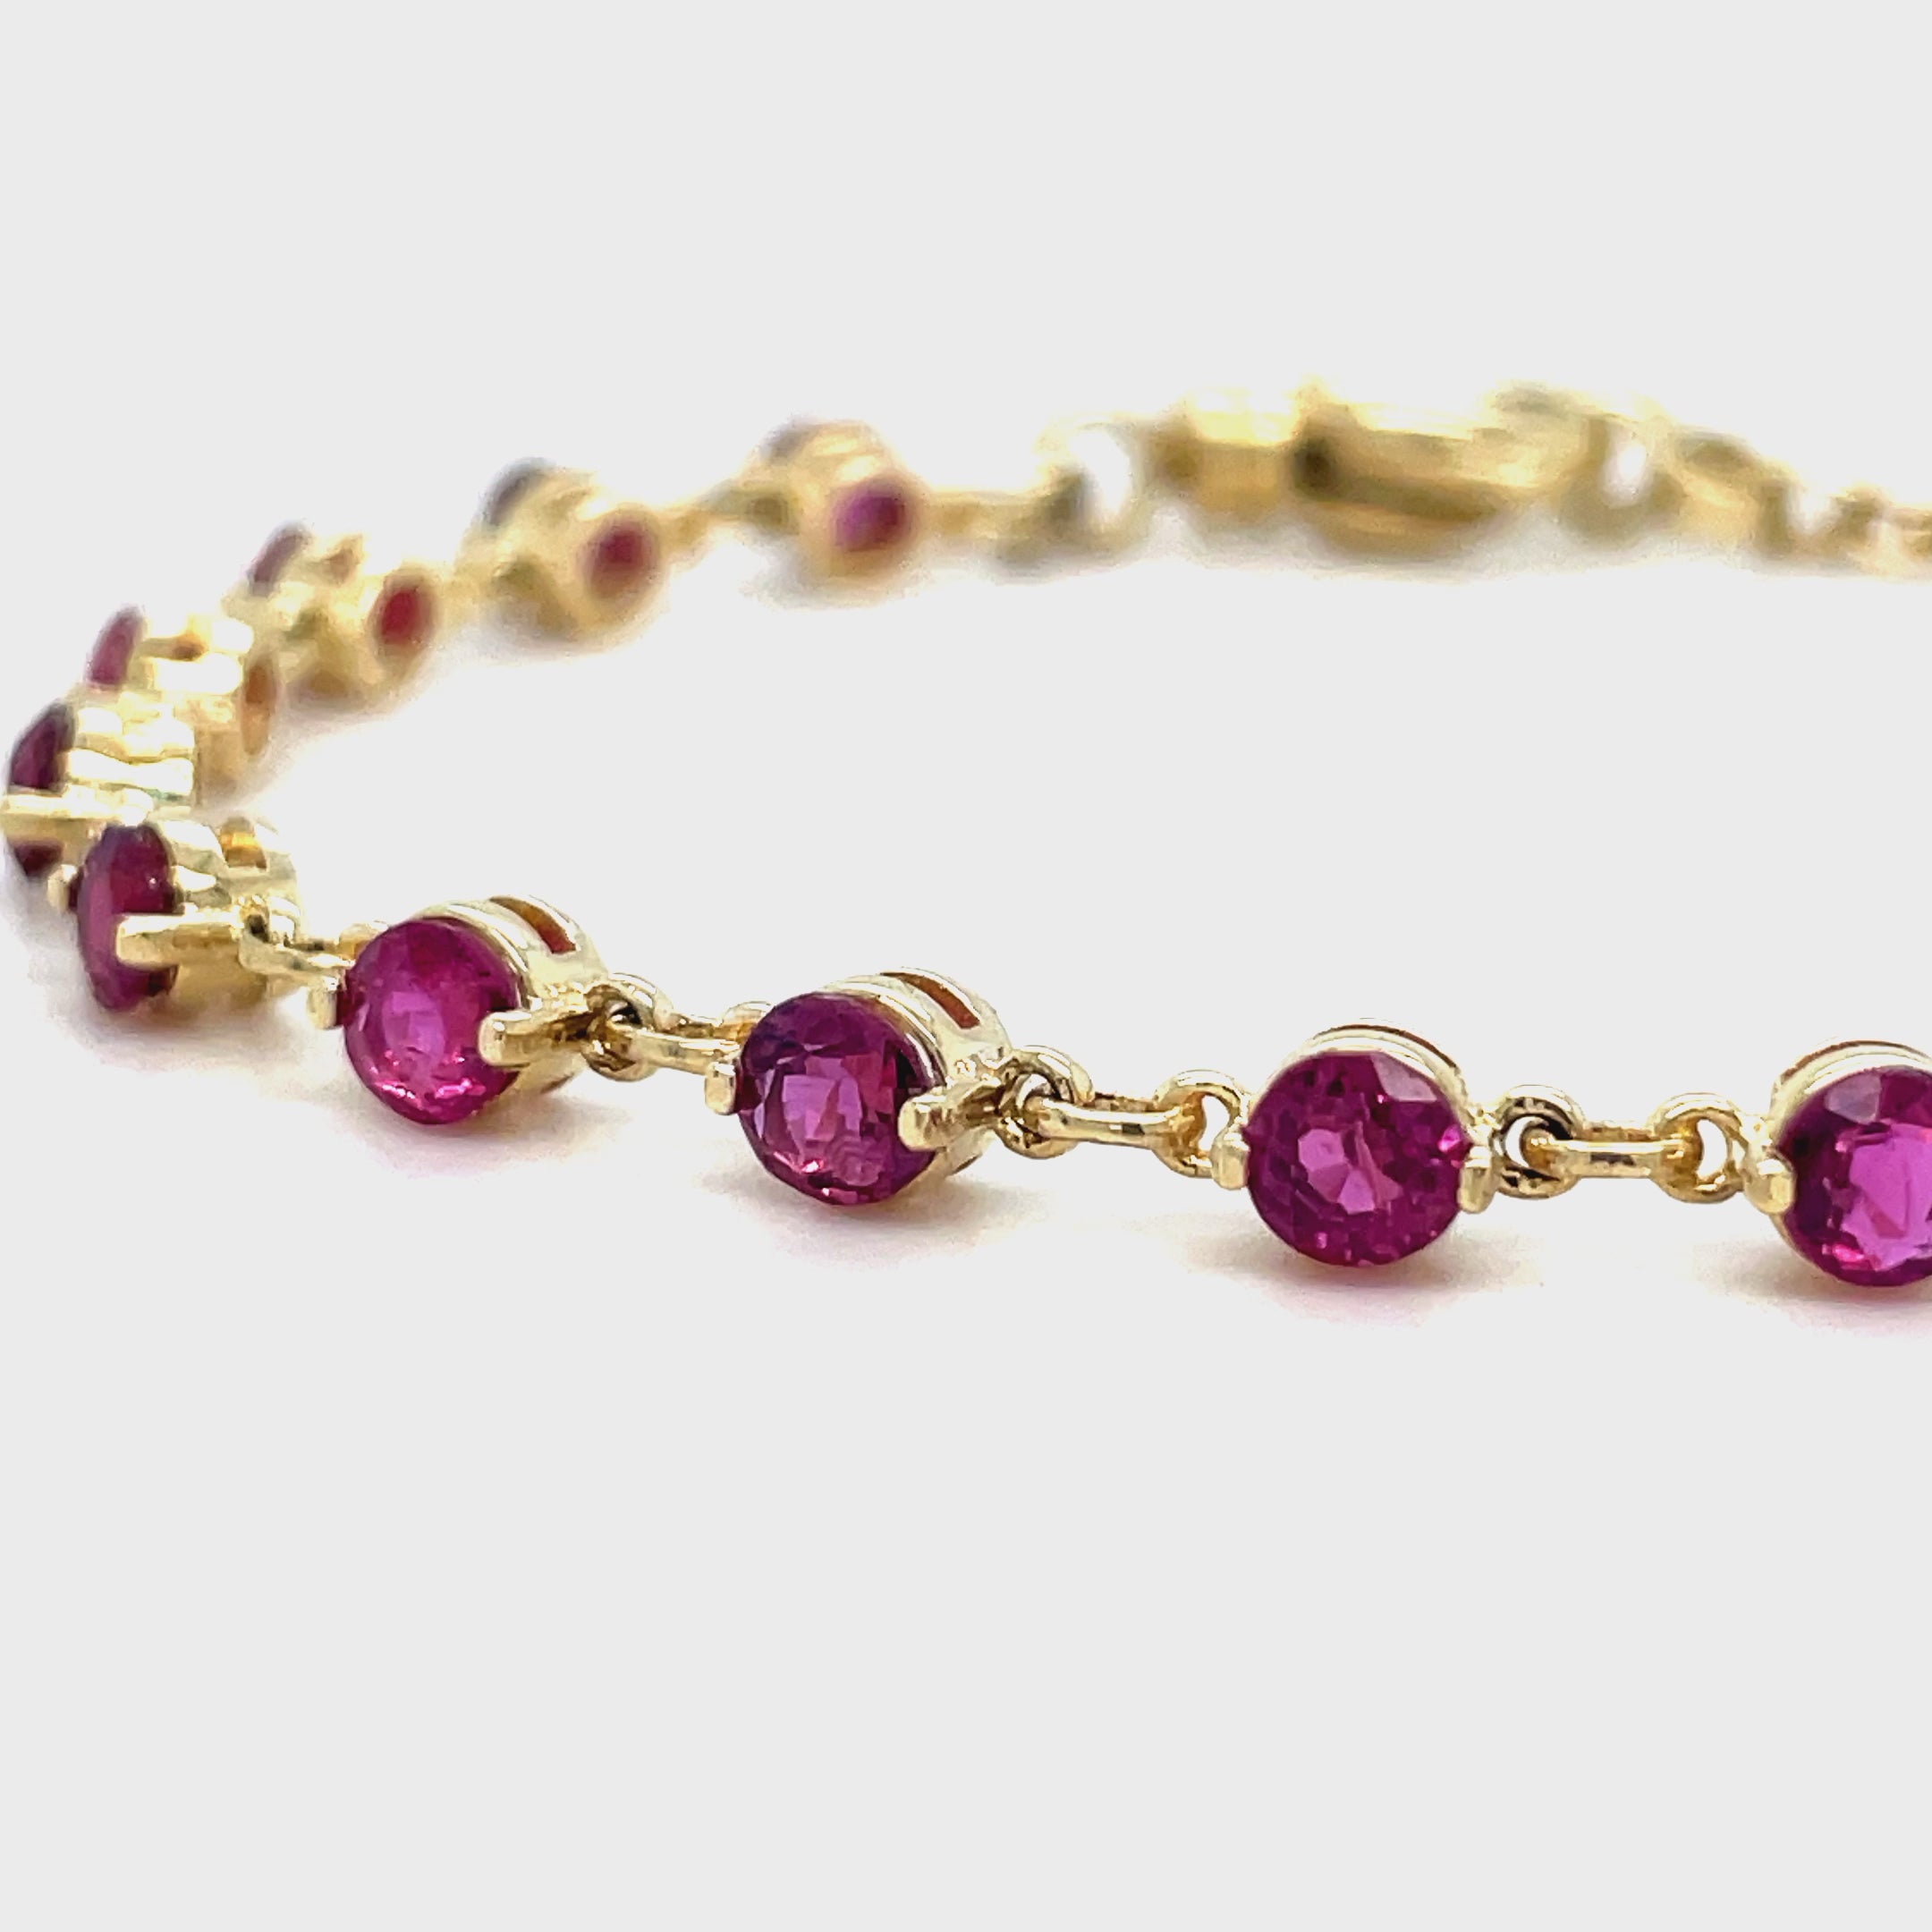 This Ruby Yellow Gold Bracelet features a sparkling round ruby weighing 3.60 carats. The 14k yellow gold setting is both elegant and durable, while the secure lobster catch ensures this bracelet stays comfortably on your wrist at 7" long. Enhance your look with this stunning piece.